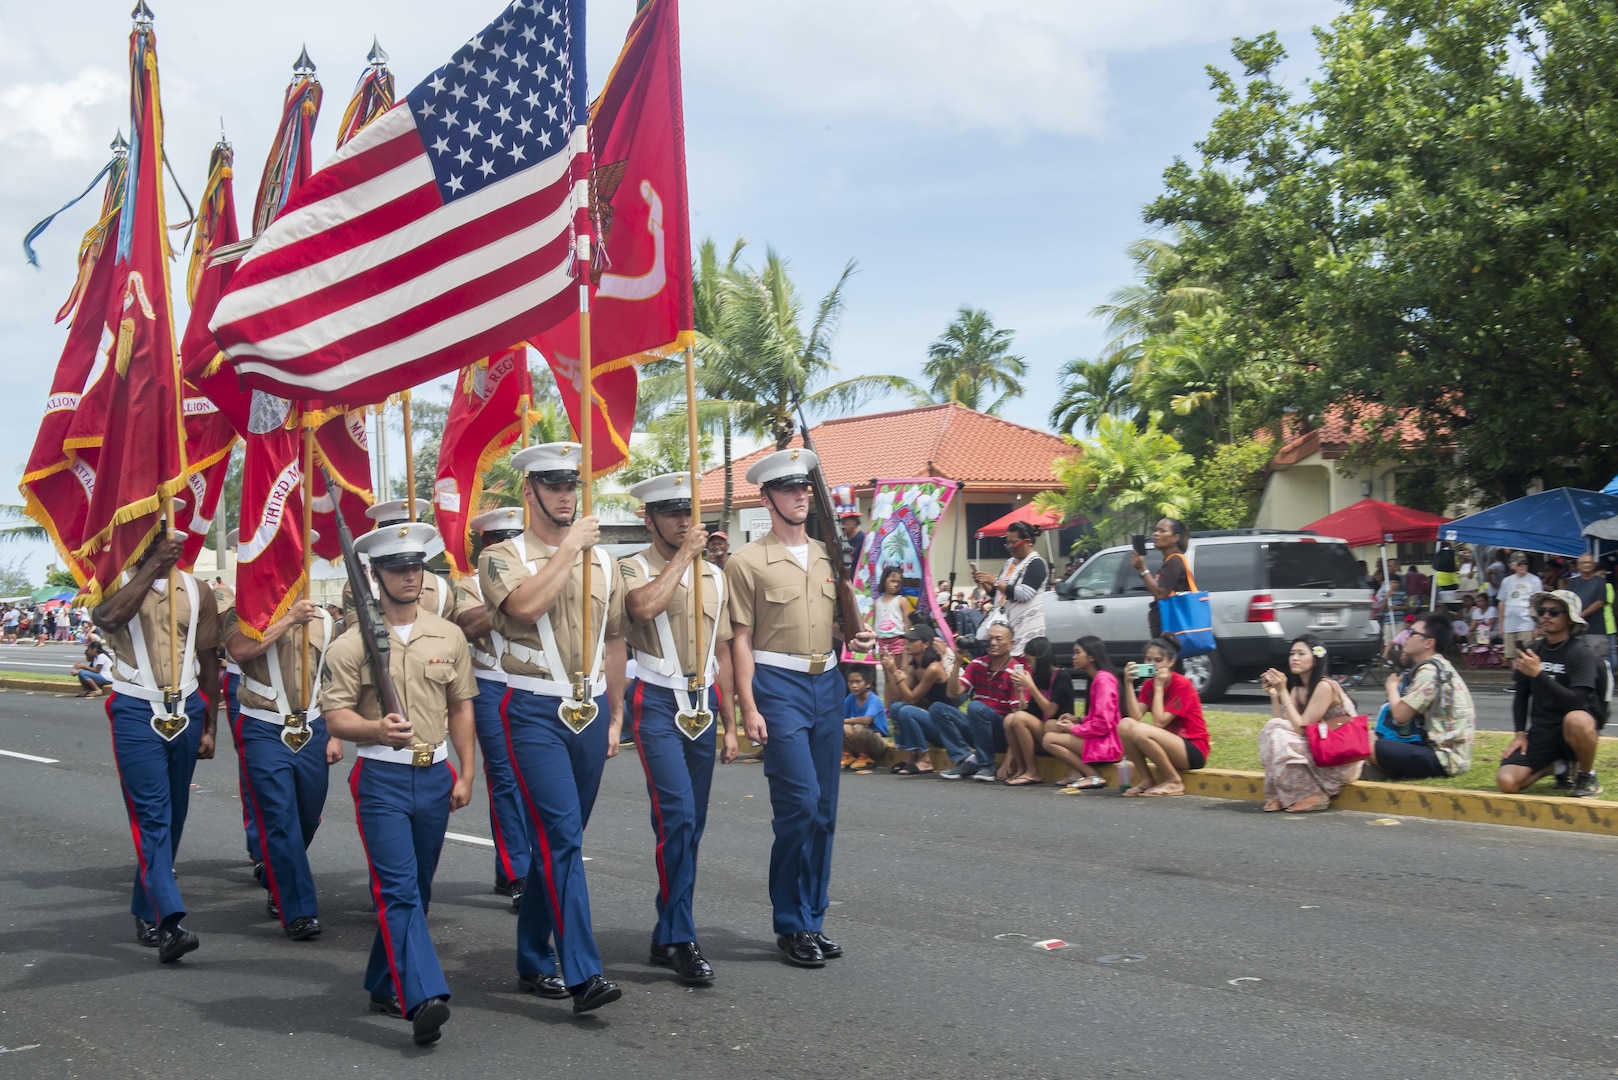 U.S. Marines march during the 73rd Guam Liberation Day parade July 21, 2017, in Hagåtña, Guam. The parade commemorated 73 years since U.S. armed forces liberated the island from Japanese occupation. During World War II, Japan seized Guam on December 10, 1941, and on July 21, 1944, the U.S. armed forces liberated the island. (U.S. Air Force photo by Airman 1st Class Christopher Quail)